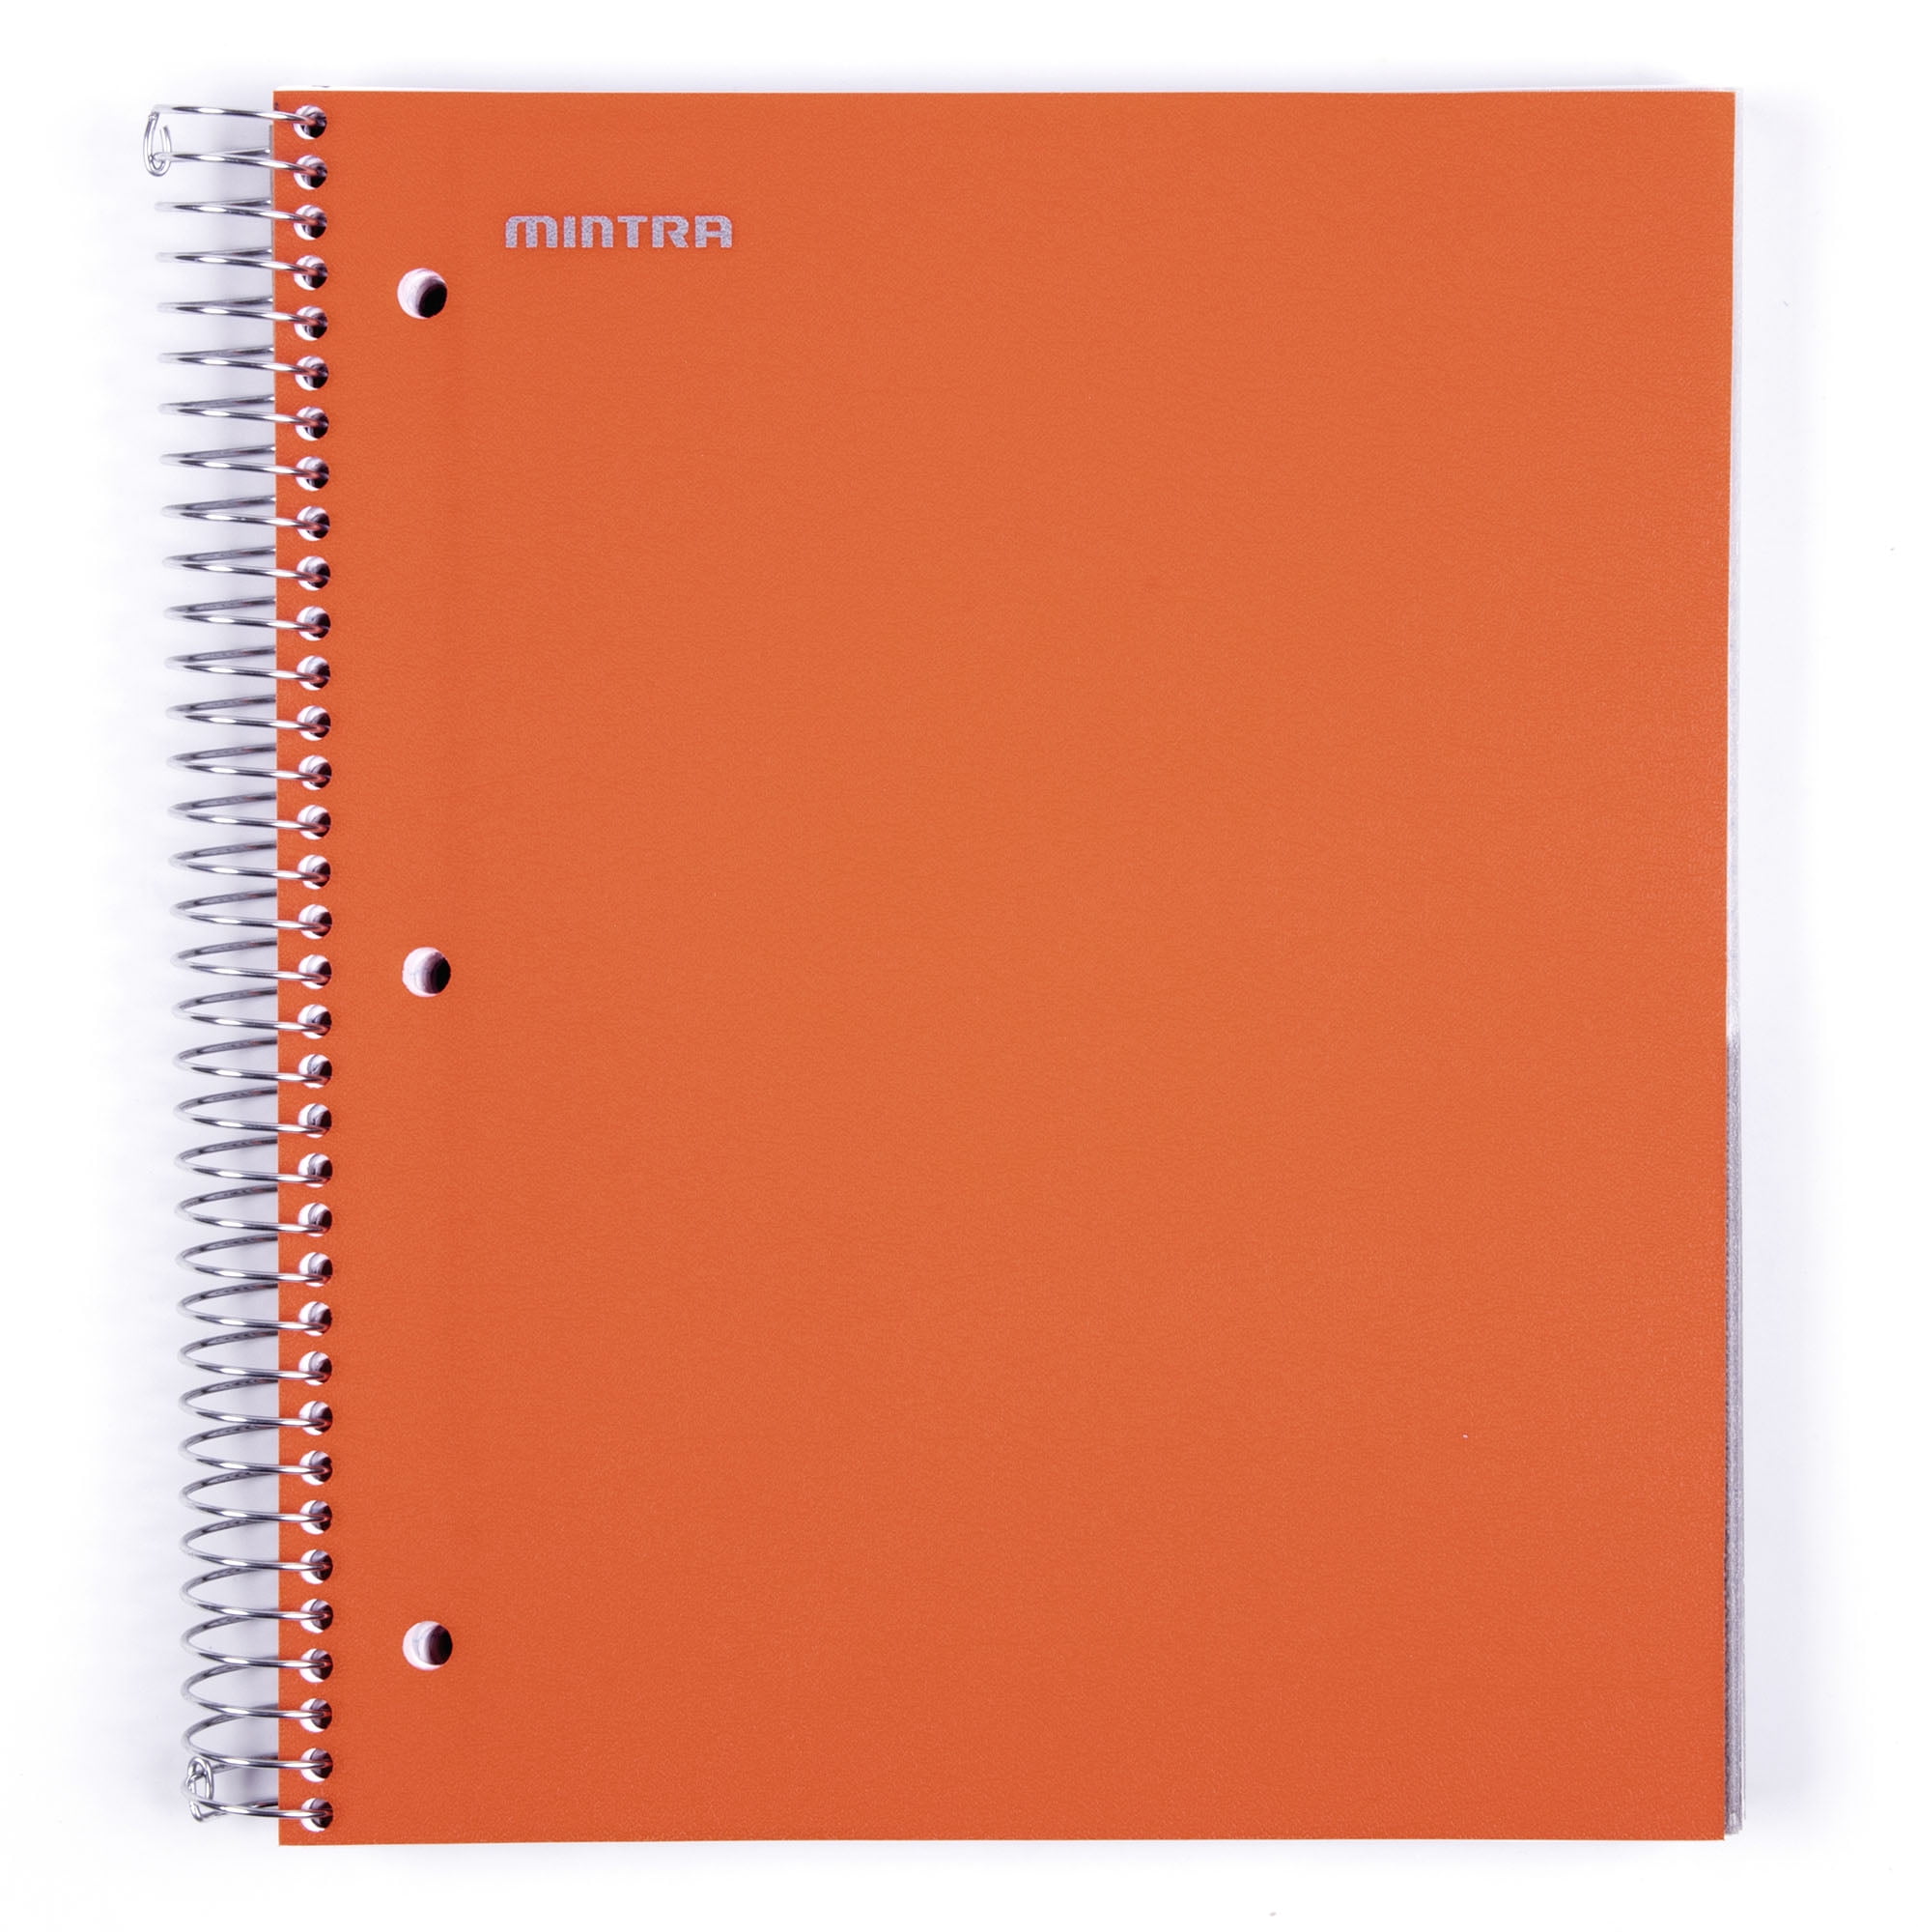 Arctic Ice, College Ruled 1pk 5 Subject Mintra Office Durable Spiral Notebooks 